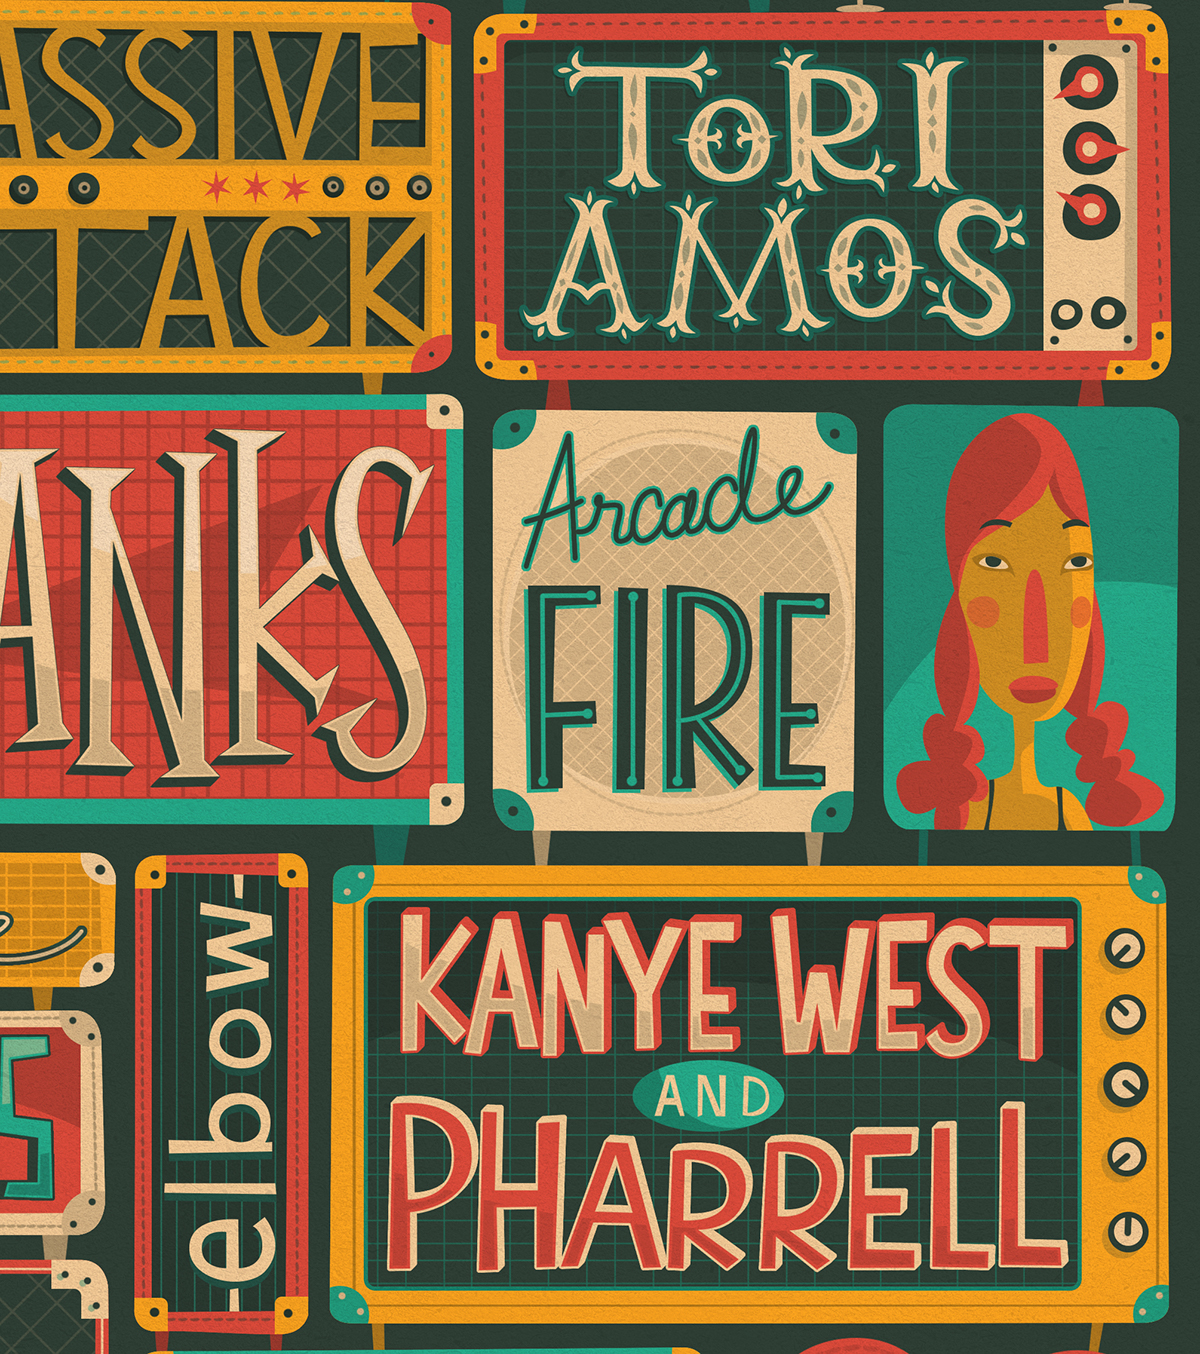 bands livemusic festivals guitar songs elbow arctic monkeys Kanye West Amps speakers HAND LETTERING hand drawn type bob dylan limited palette Fun